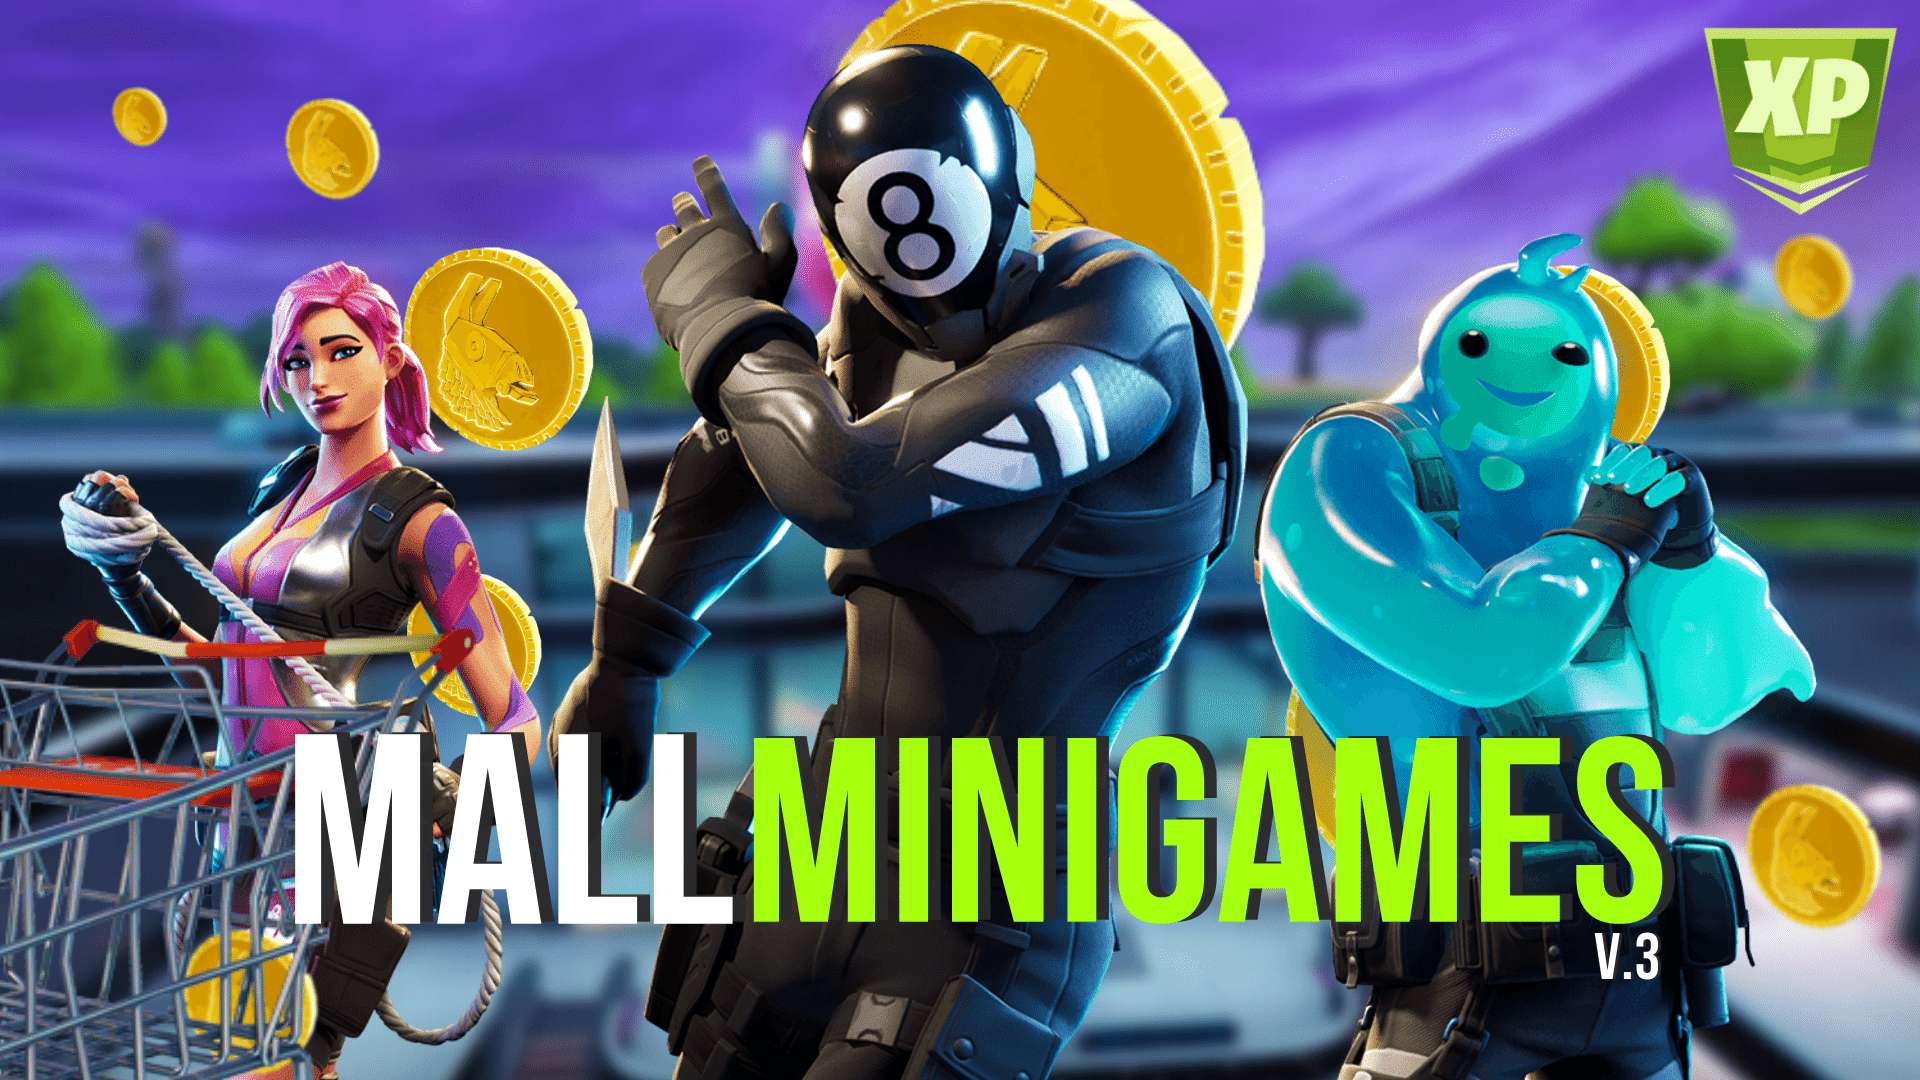 PARTY MALL🎉 ALL-IN-ONE MINIGAMES💎 8583-9448-4101